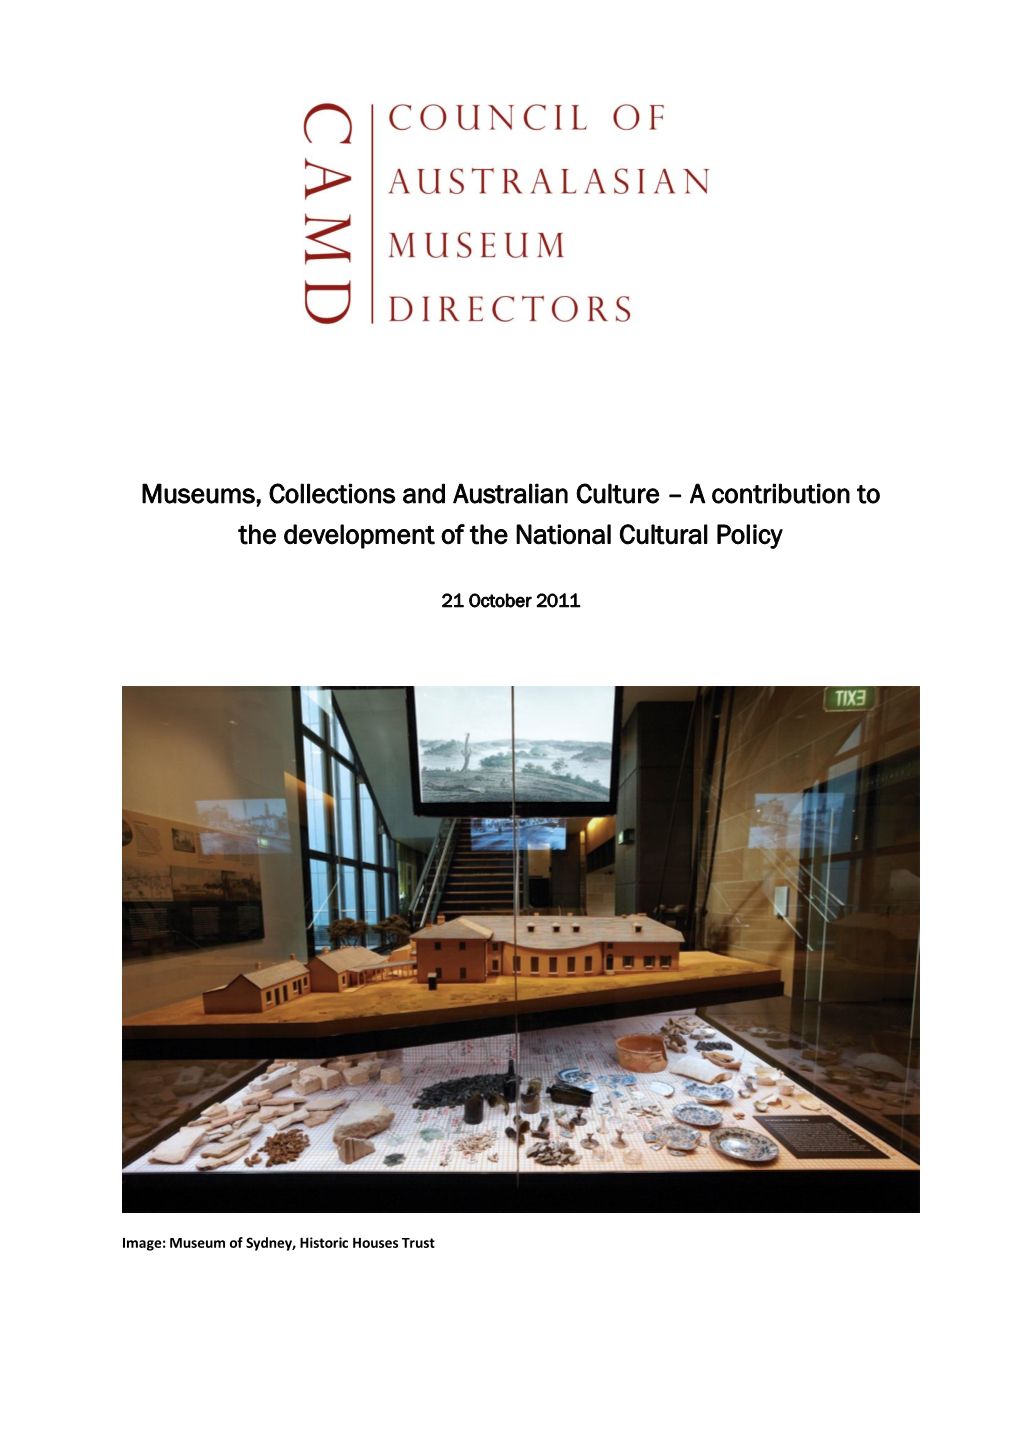 National Cultural Policy